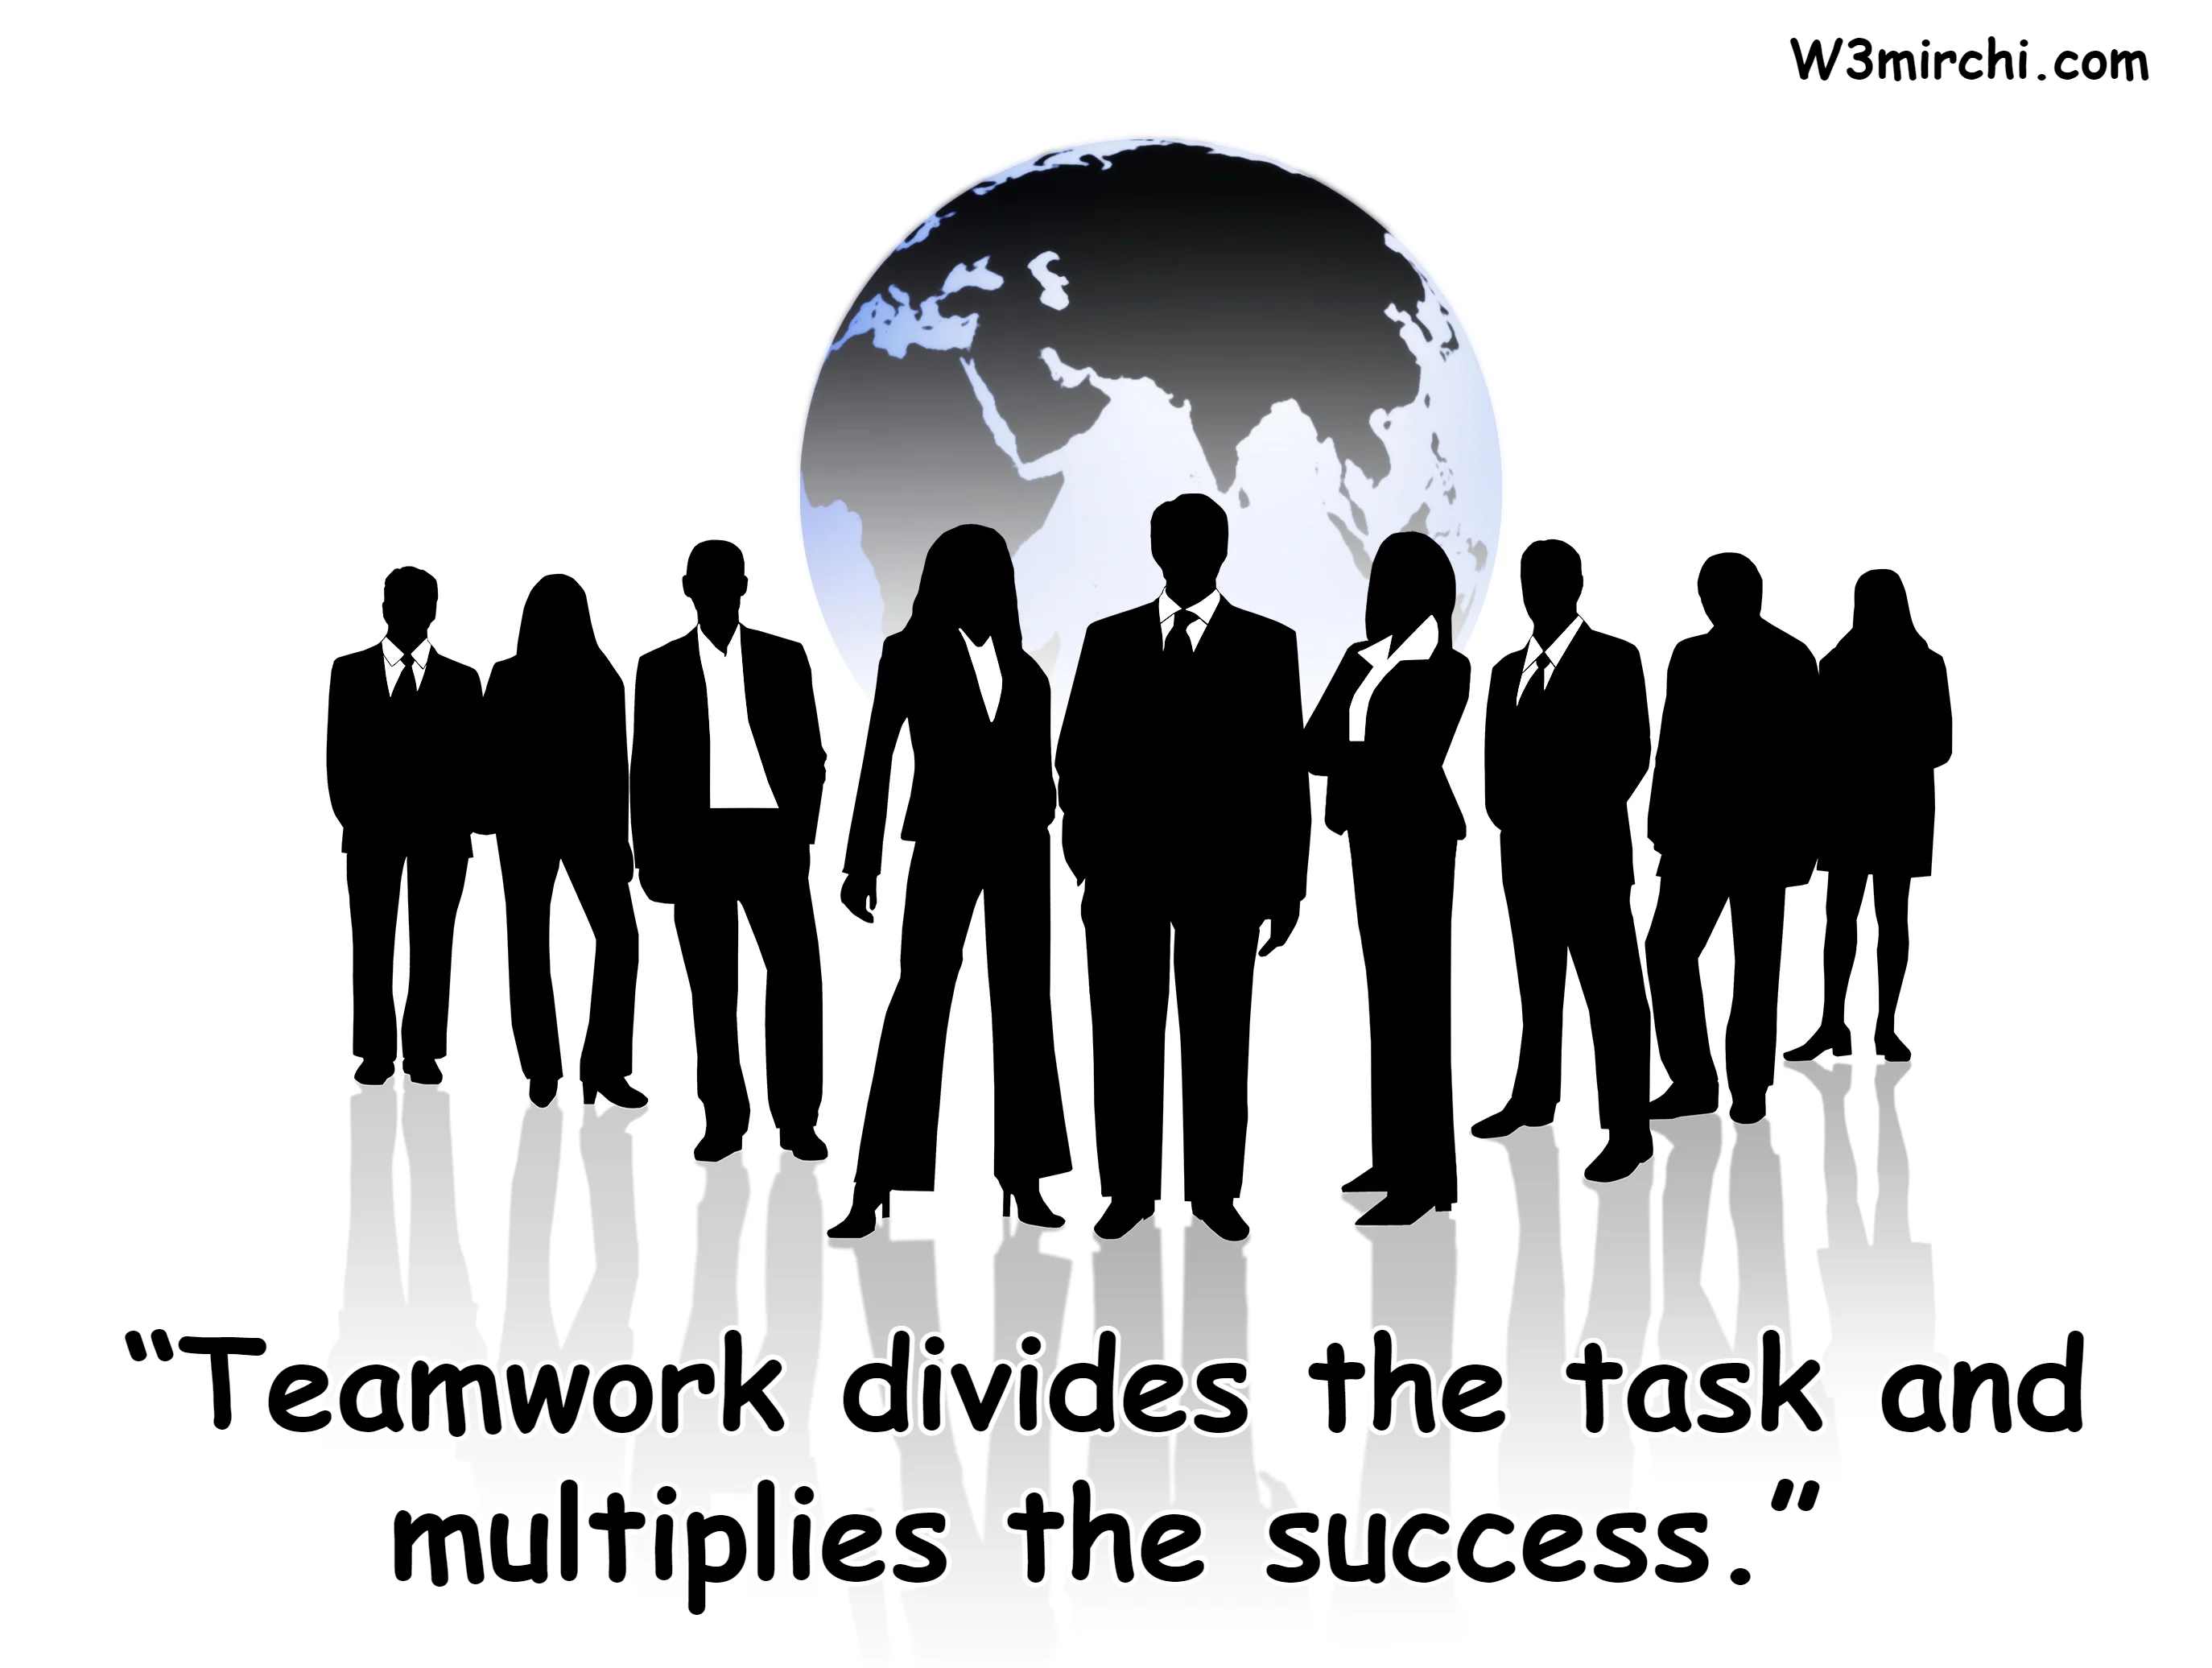 “Teamwork divides the task and